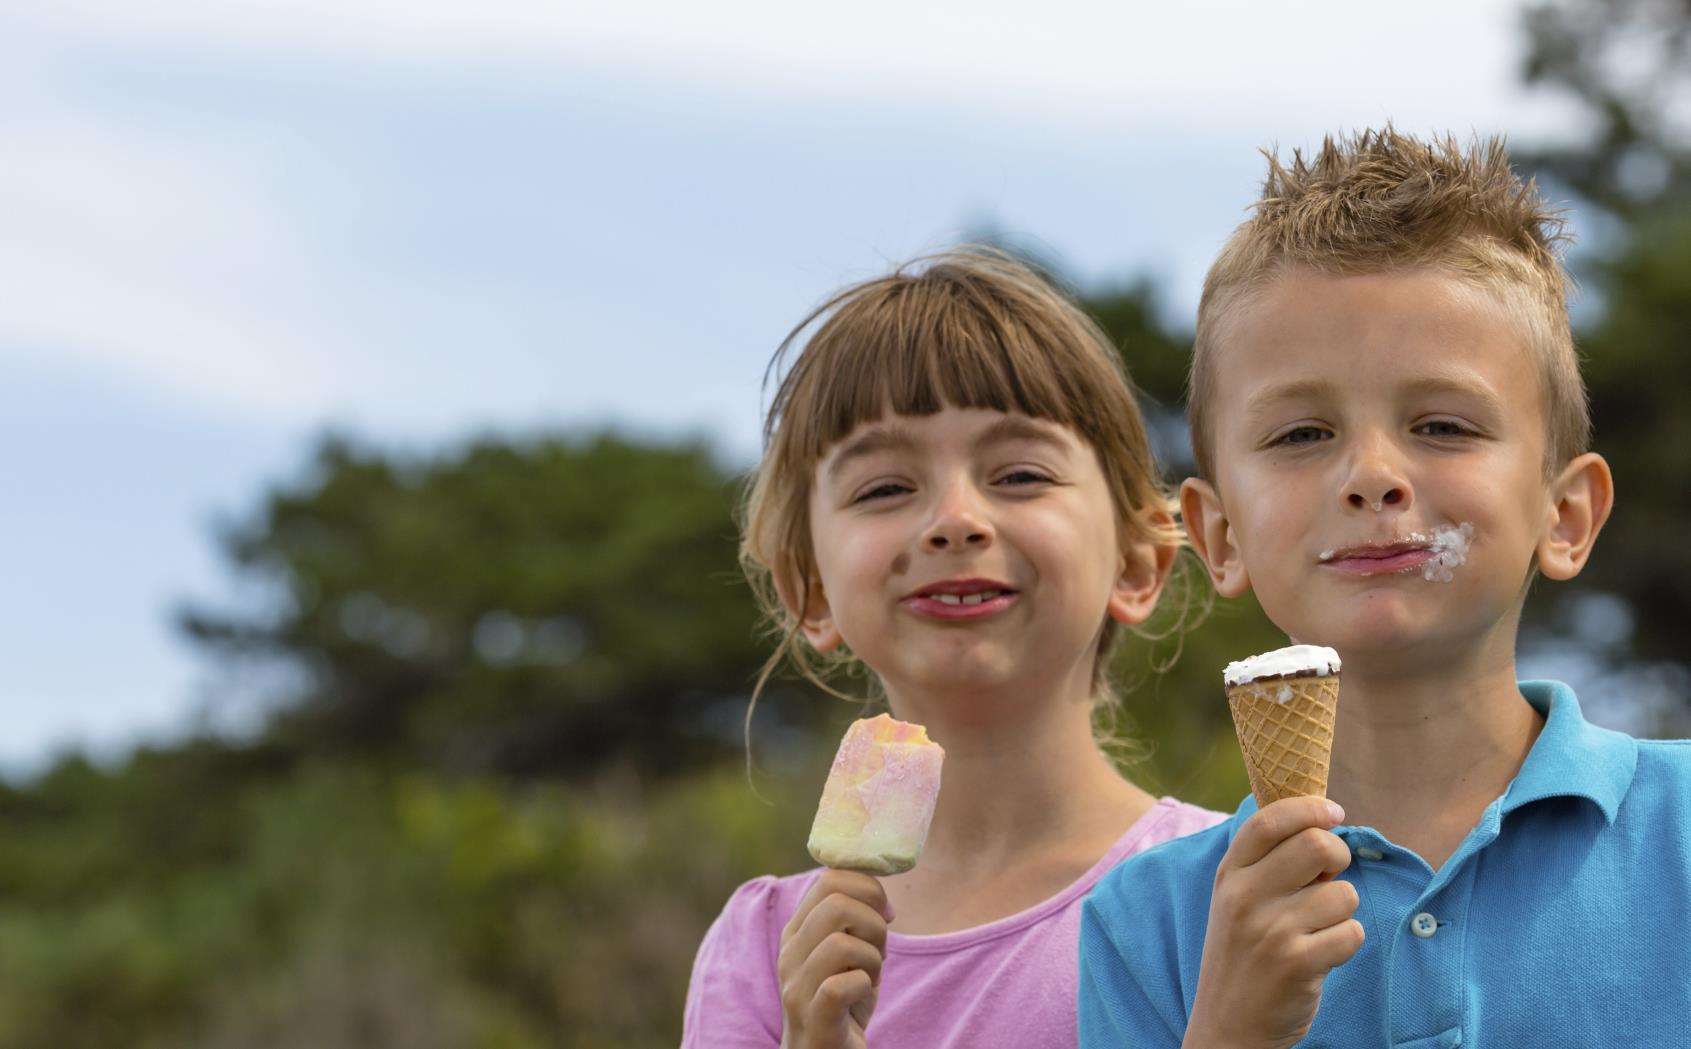 There will be an ice cream festival at Kent Life, Maidstone